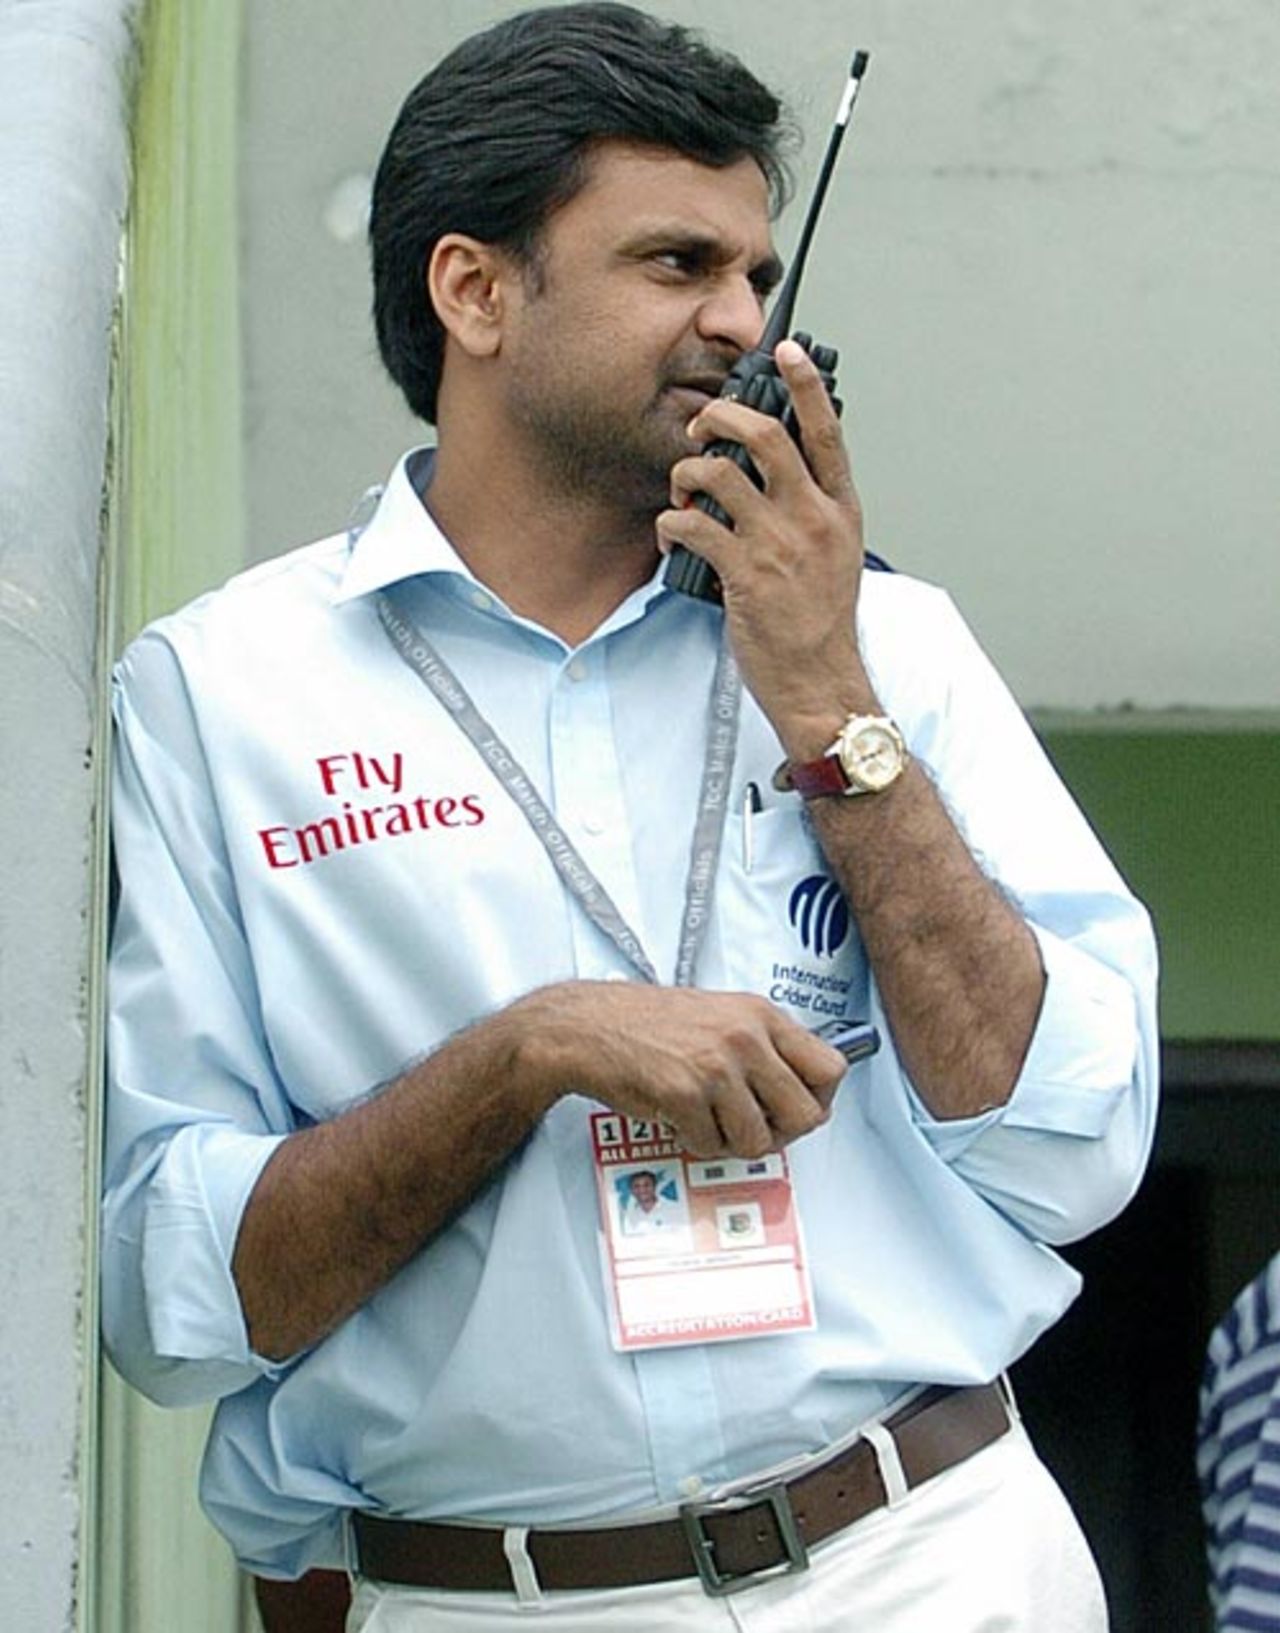 Javagal Srinath, the match referee, talks on his walkie talkie, Bangladesh v New Zealand, 2nd Test, Mirpur, 3rd day, October 27, 2008